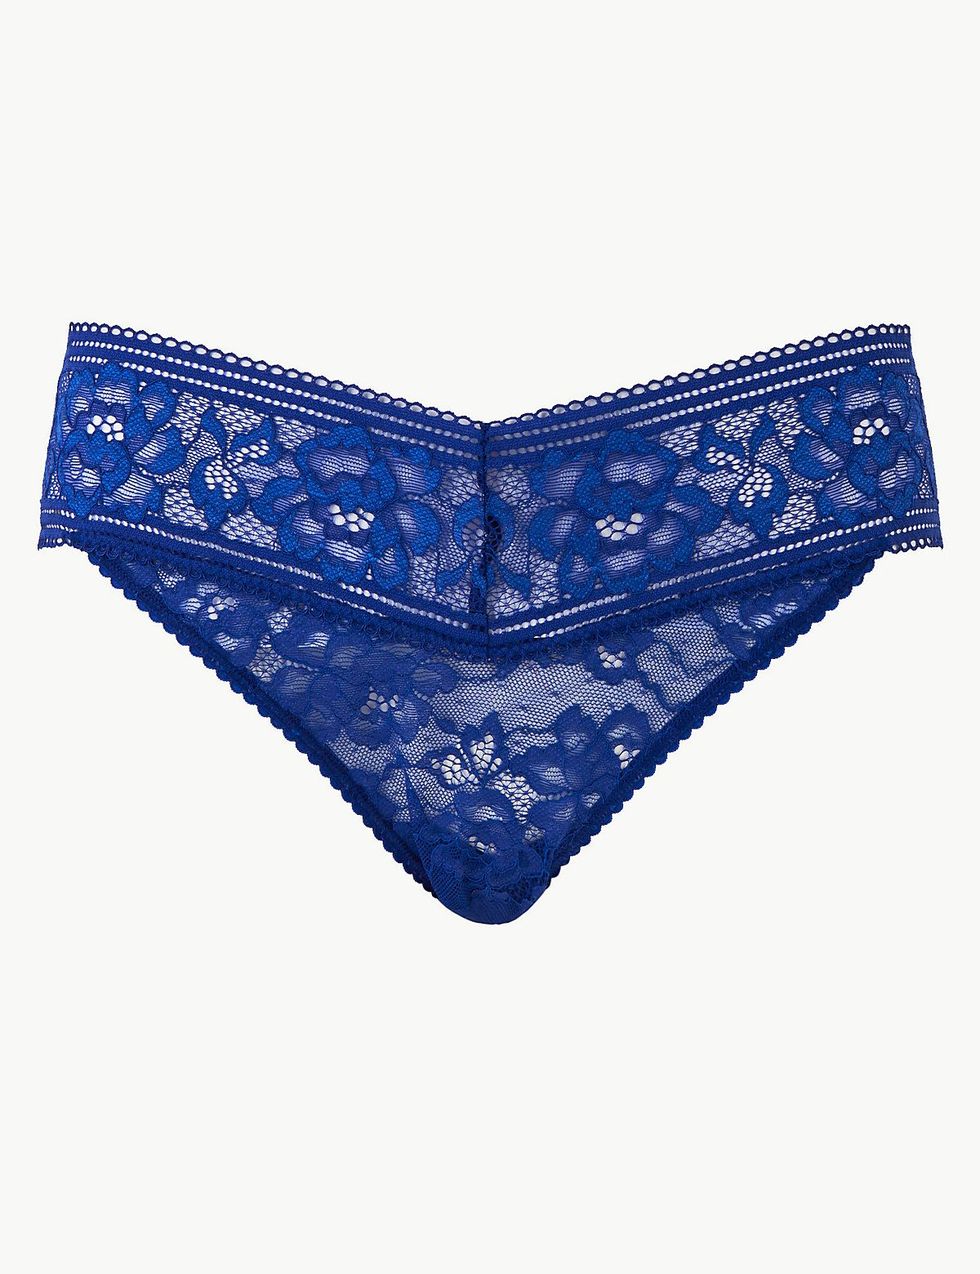 Marks & Spencer Marks and Spencer Women's Louisa Lace Under